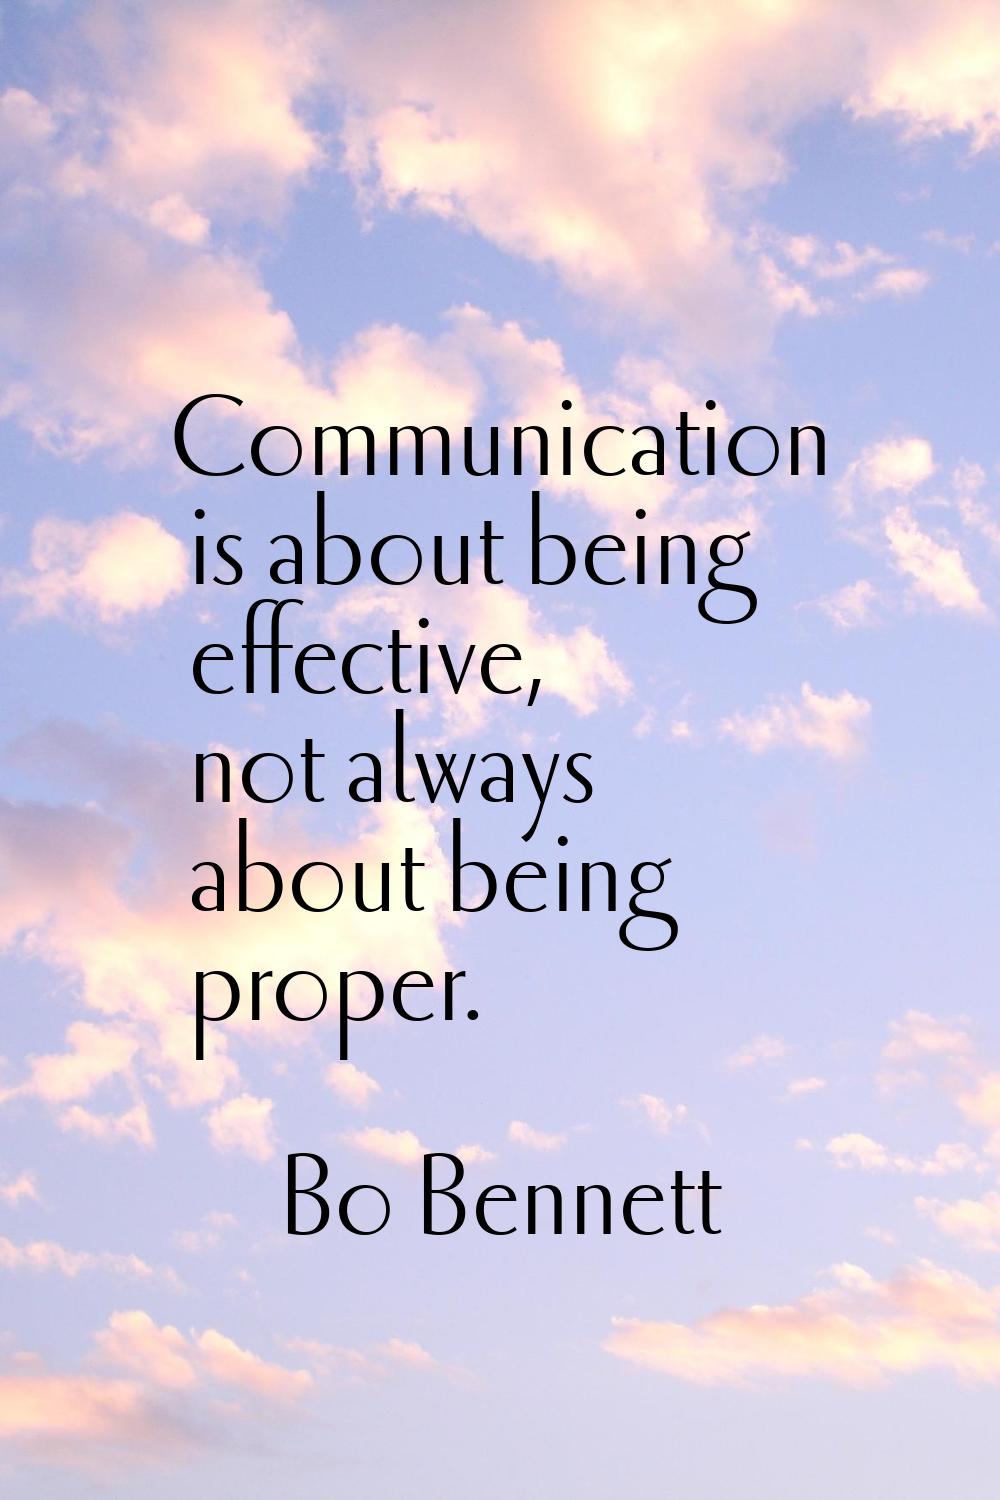 Communication is about being effective, not always about being proper.